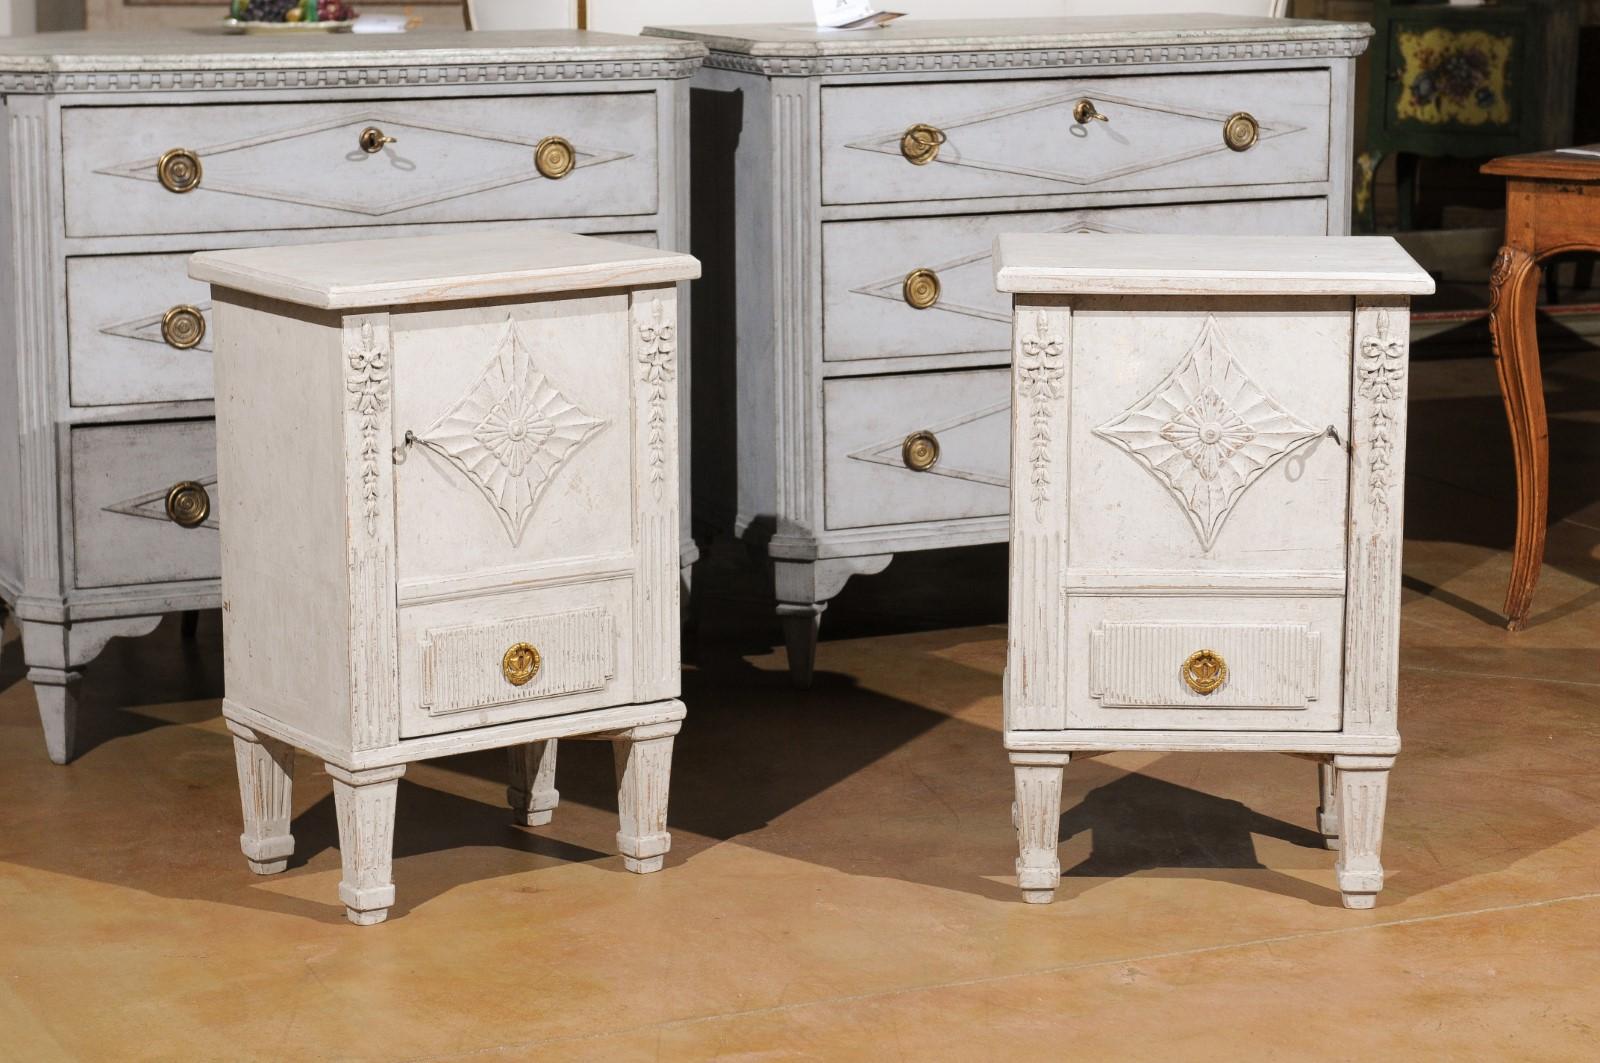 A pair of Swedish Neoclassical style painted nightstand tables from the 20th century, with single doors and carved décor. Born in Sweden, each of this pair of painted nightstand cabinets features a stylish façade presenting a single door adorned